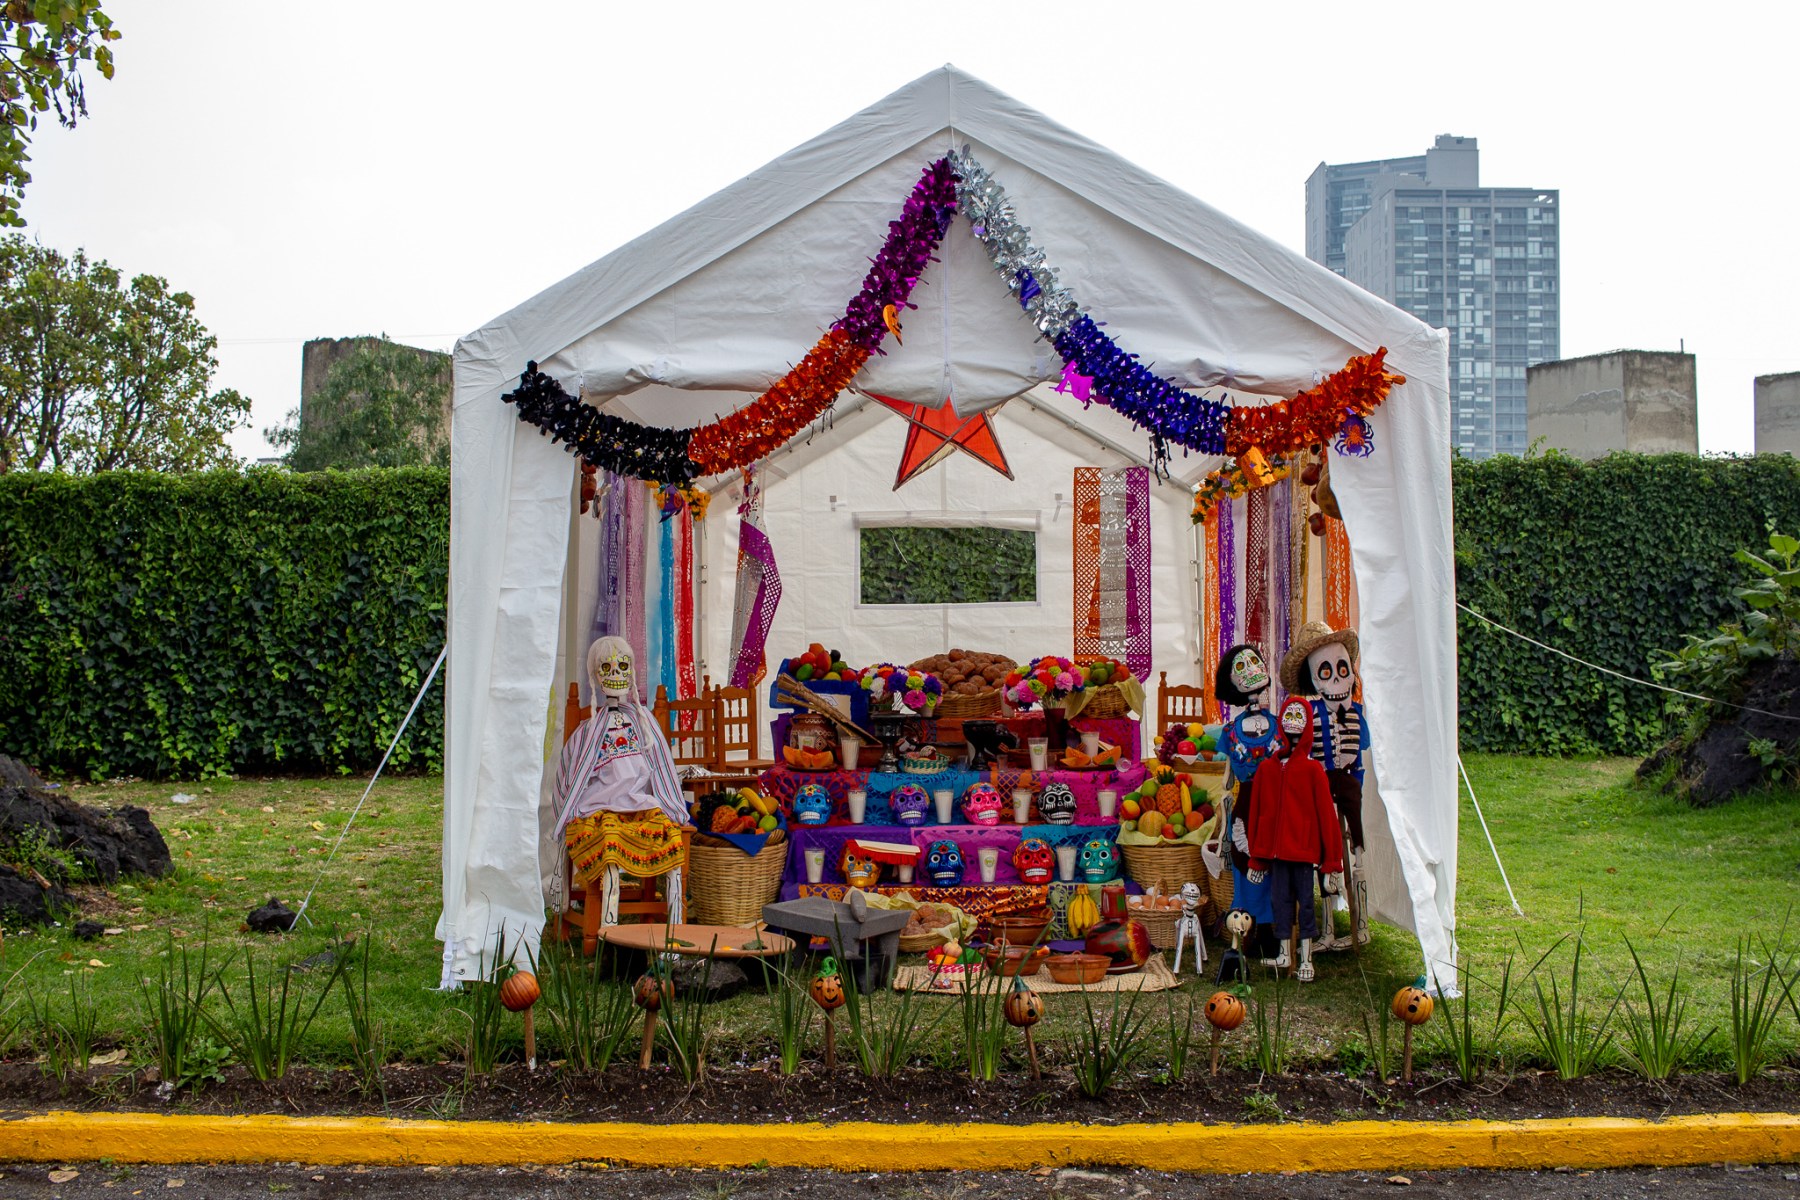 After the celebrations are over, an ofrendas remains standing at a cemetery south of the city. Some of these altars will remain there for weeks before the families take them down.